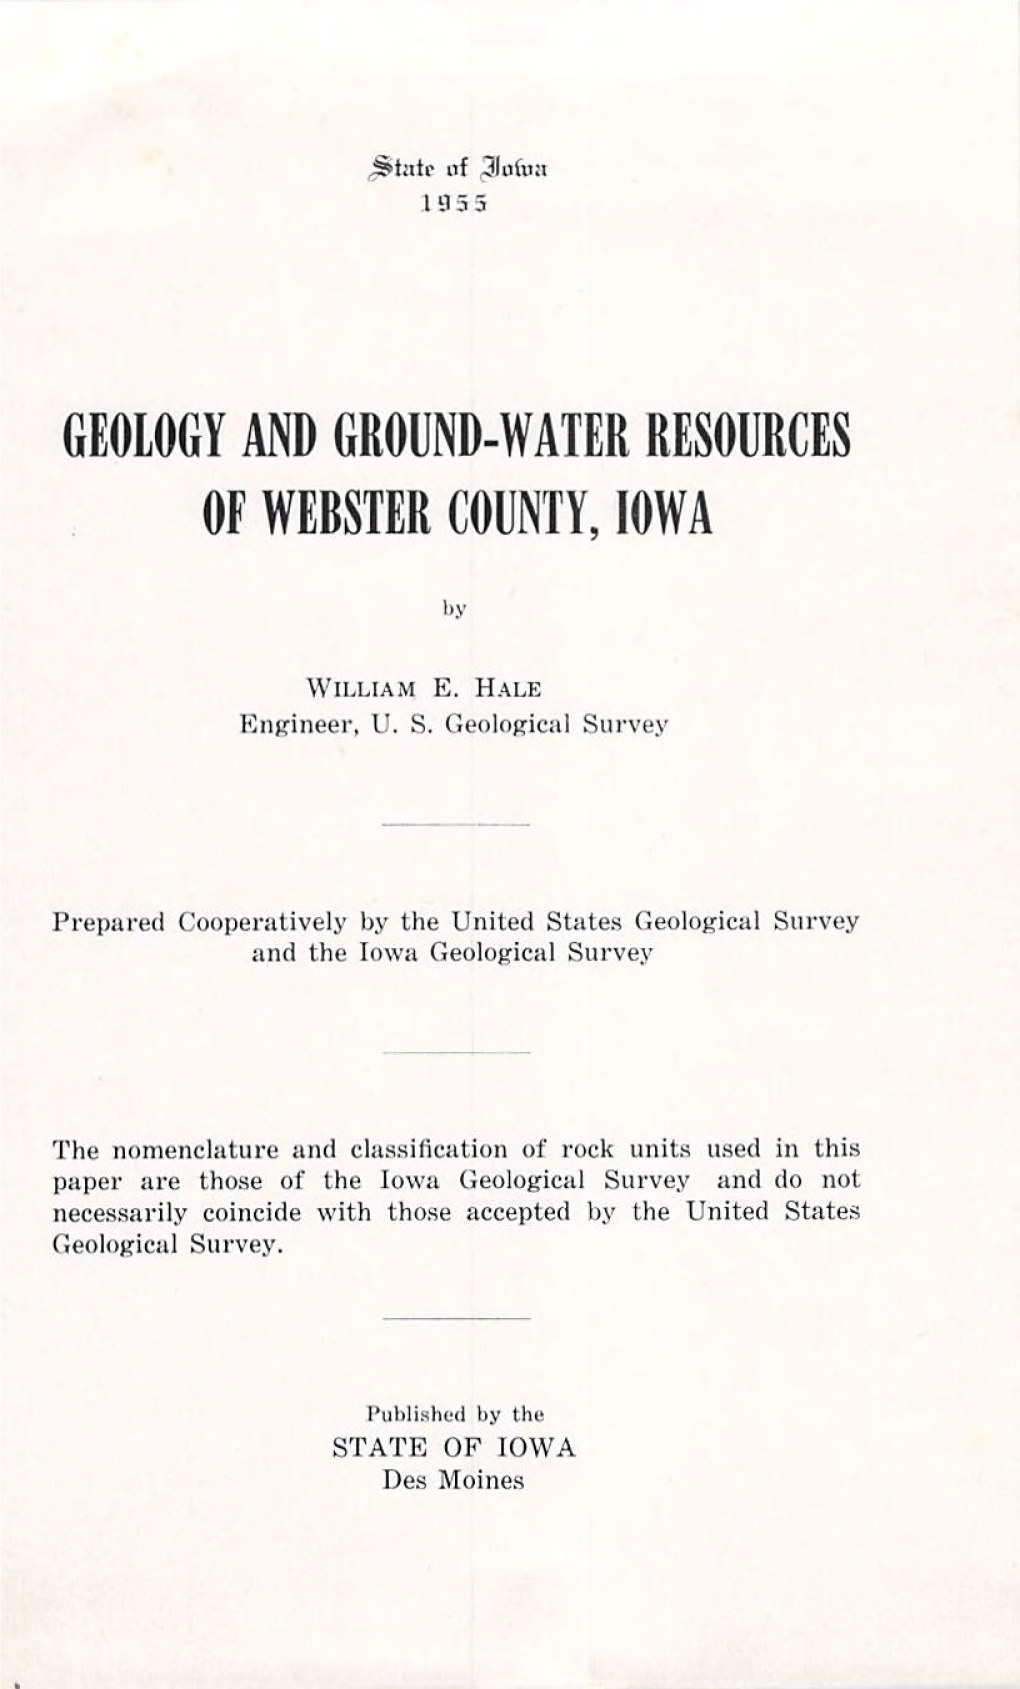 Geology and Ground-Water Resources of Webster County, Iowa